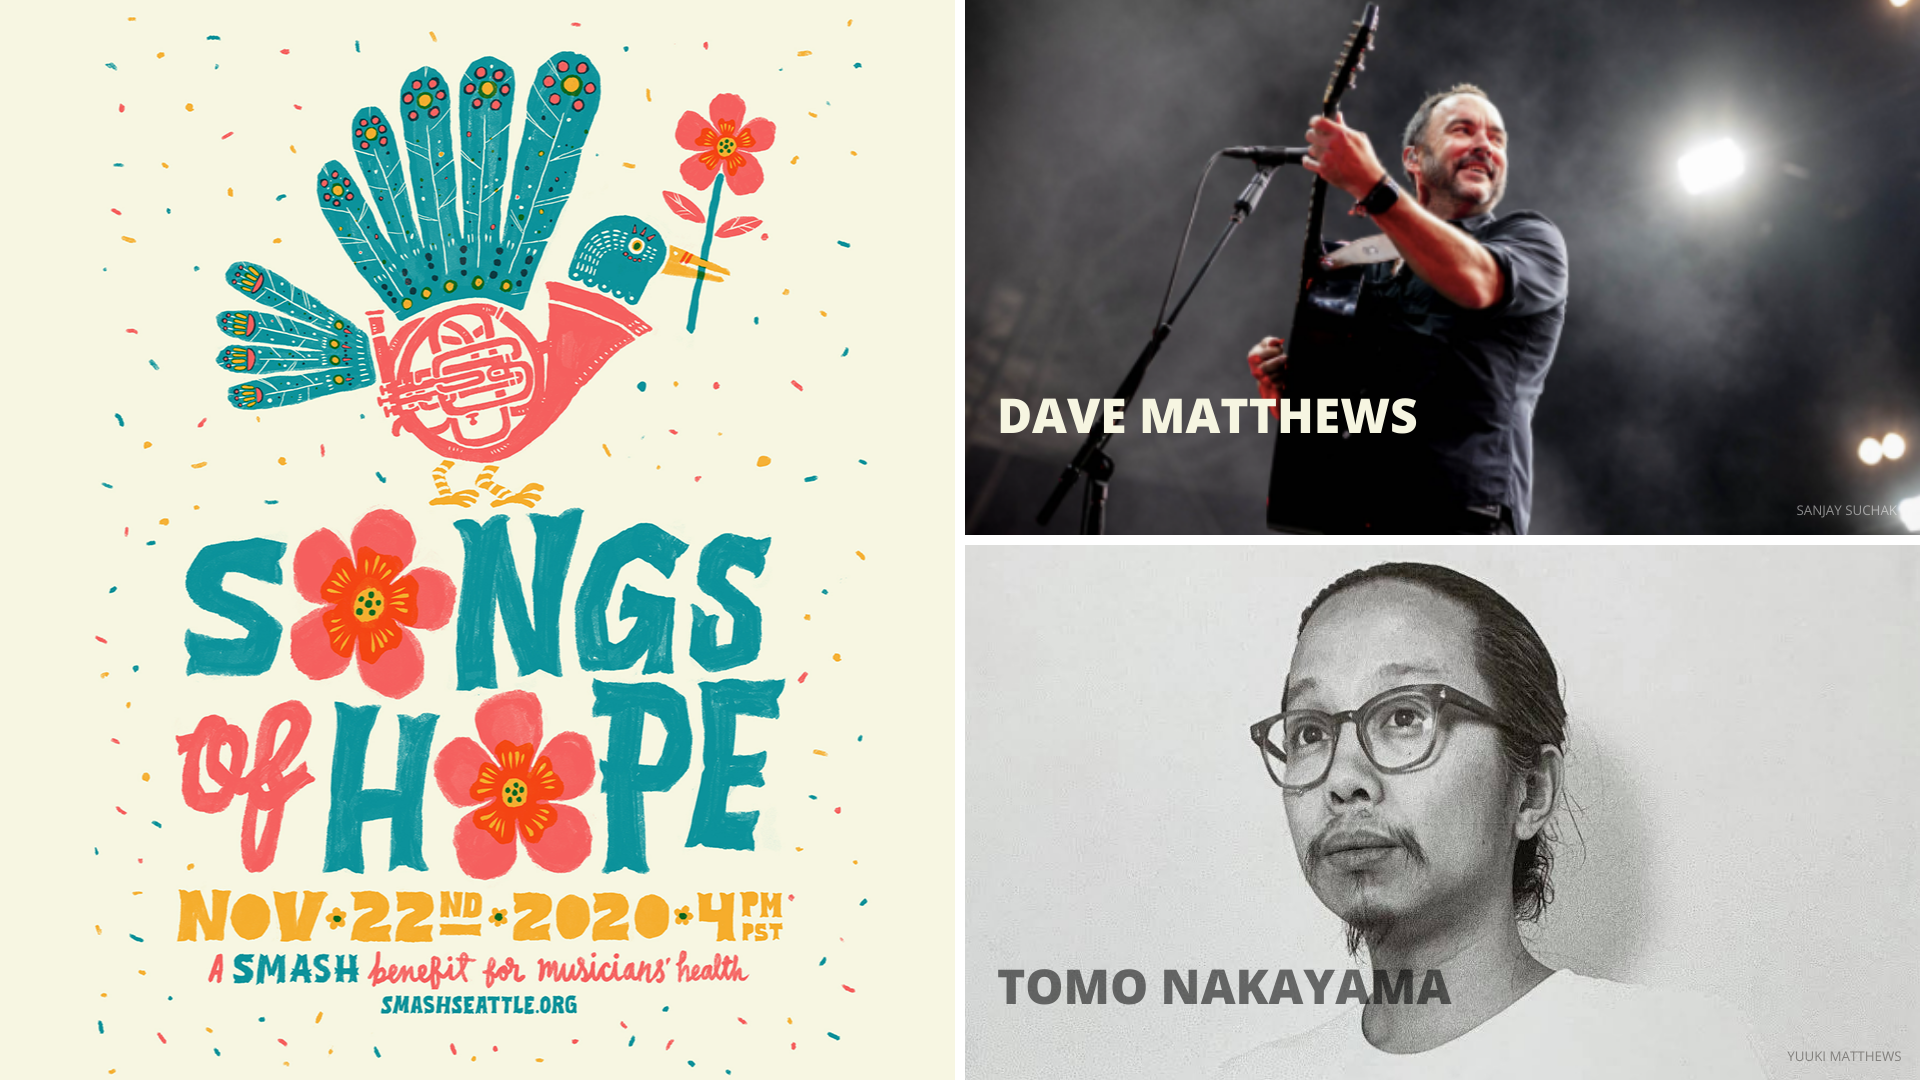 Tomo Nakayama will be performing with Dave Matthew's at the SMASH Songs of Hope benefit for musicians' health on 11/22.  smashseattle.org